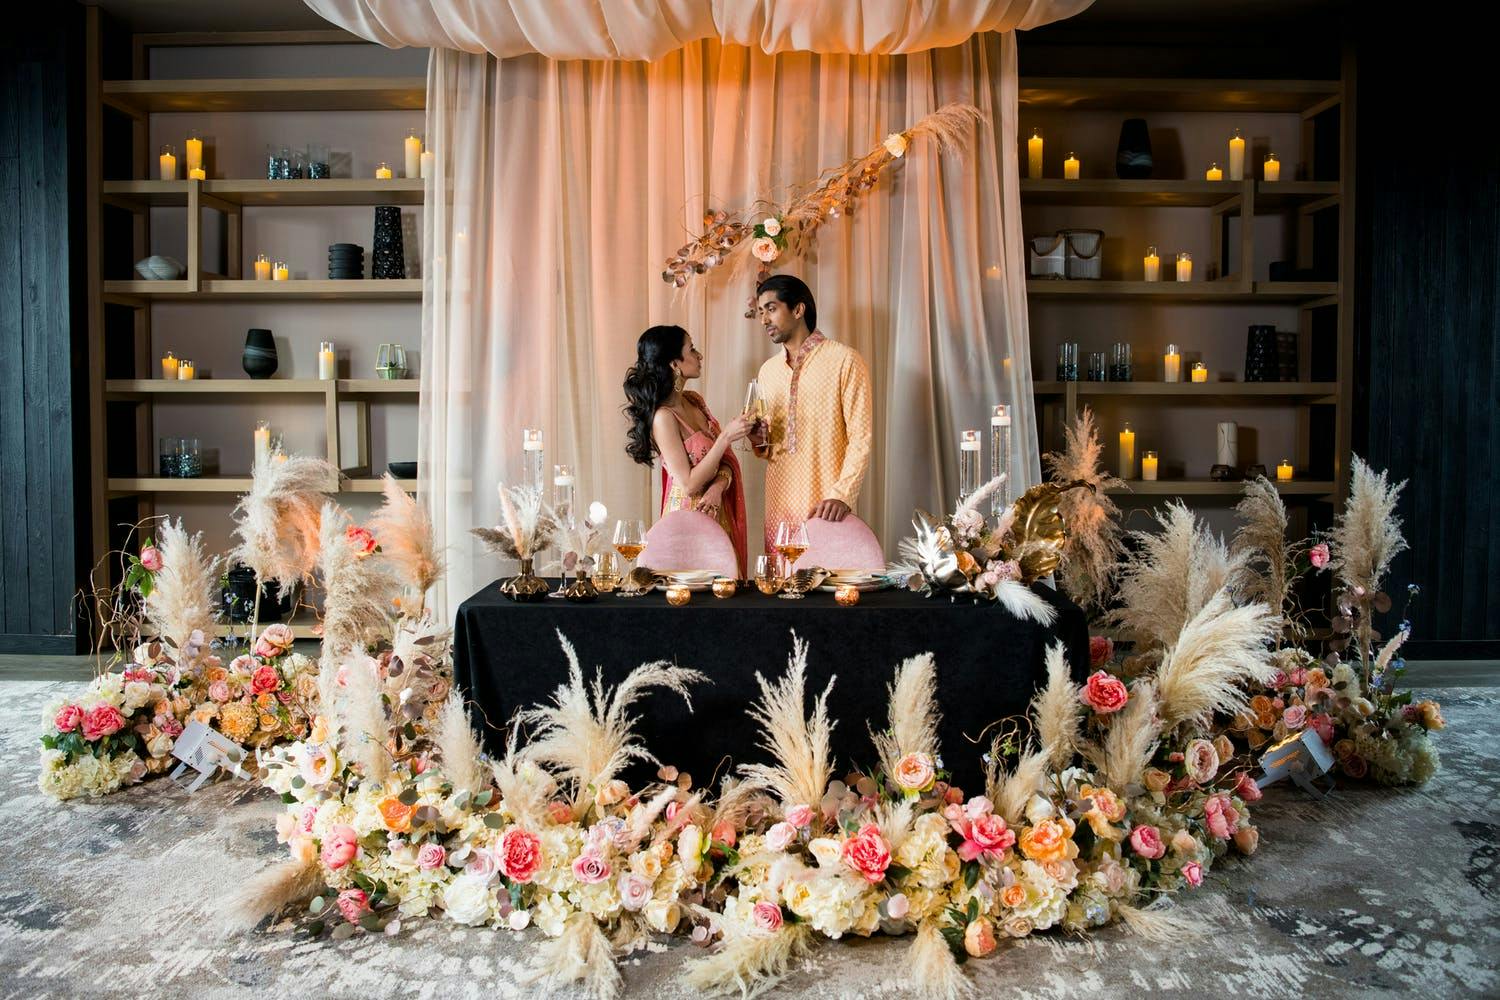 Modern South Asian wedding with black sweetheart table, dreamy pink drapery backdrop, and boho floral décor with pampas grass | PartySlate